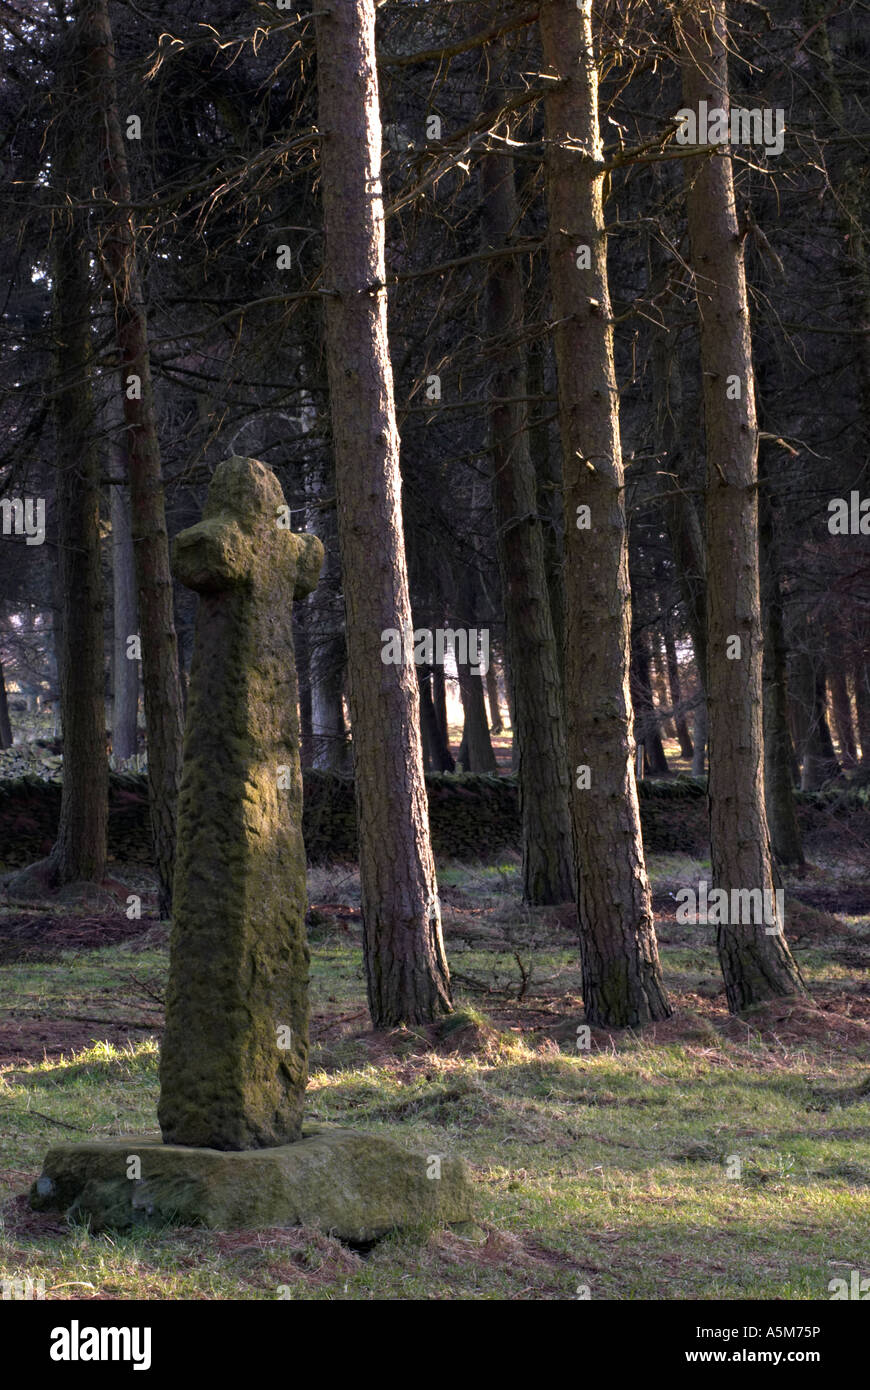 "Shillito Cross" an ancient stone cross placed in a triangular pedestal in Shillito wood    in Derbyshire "Great Britain" Stock Photo